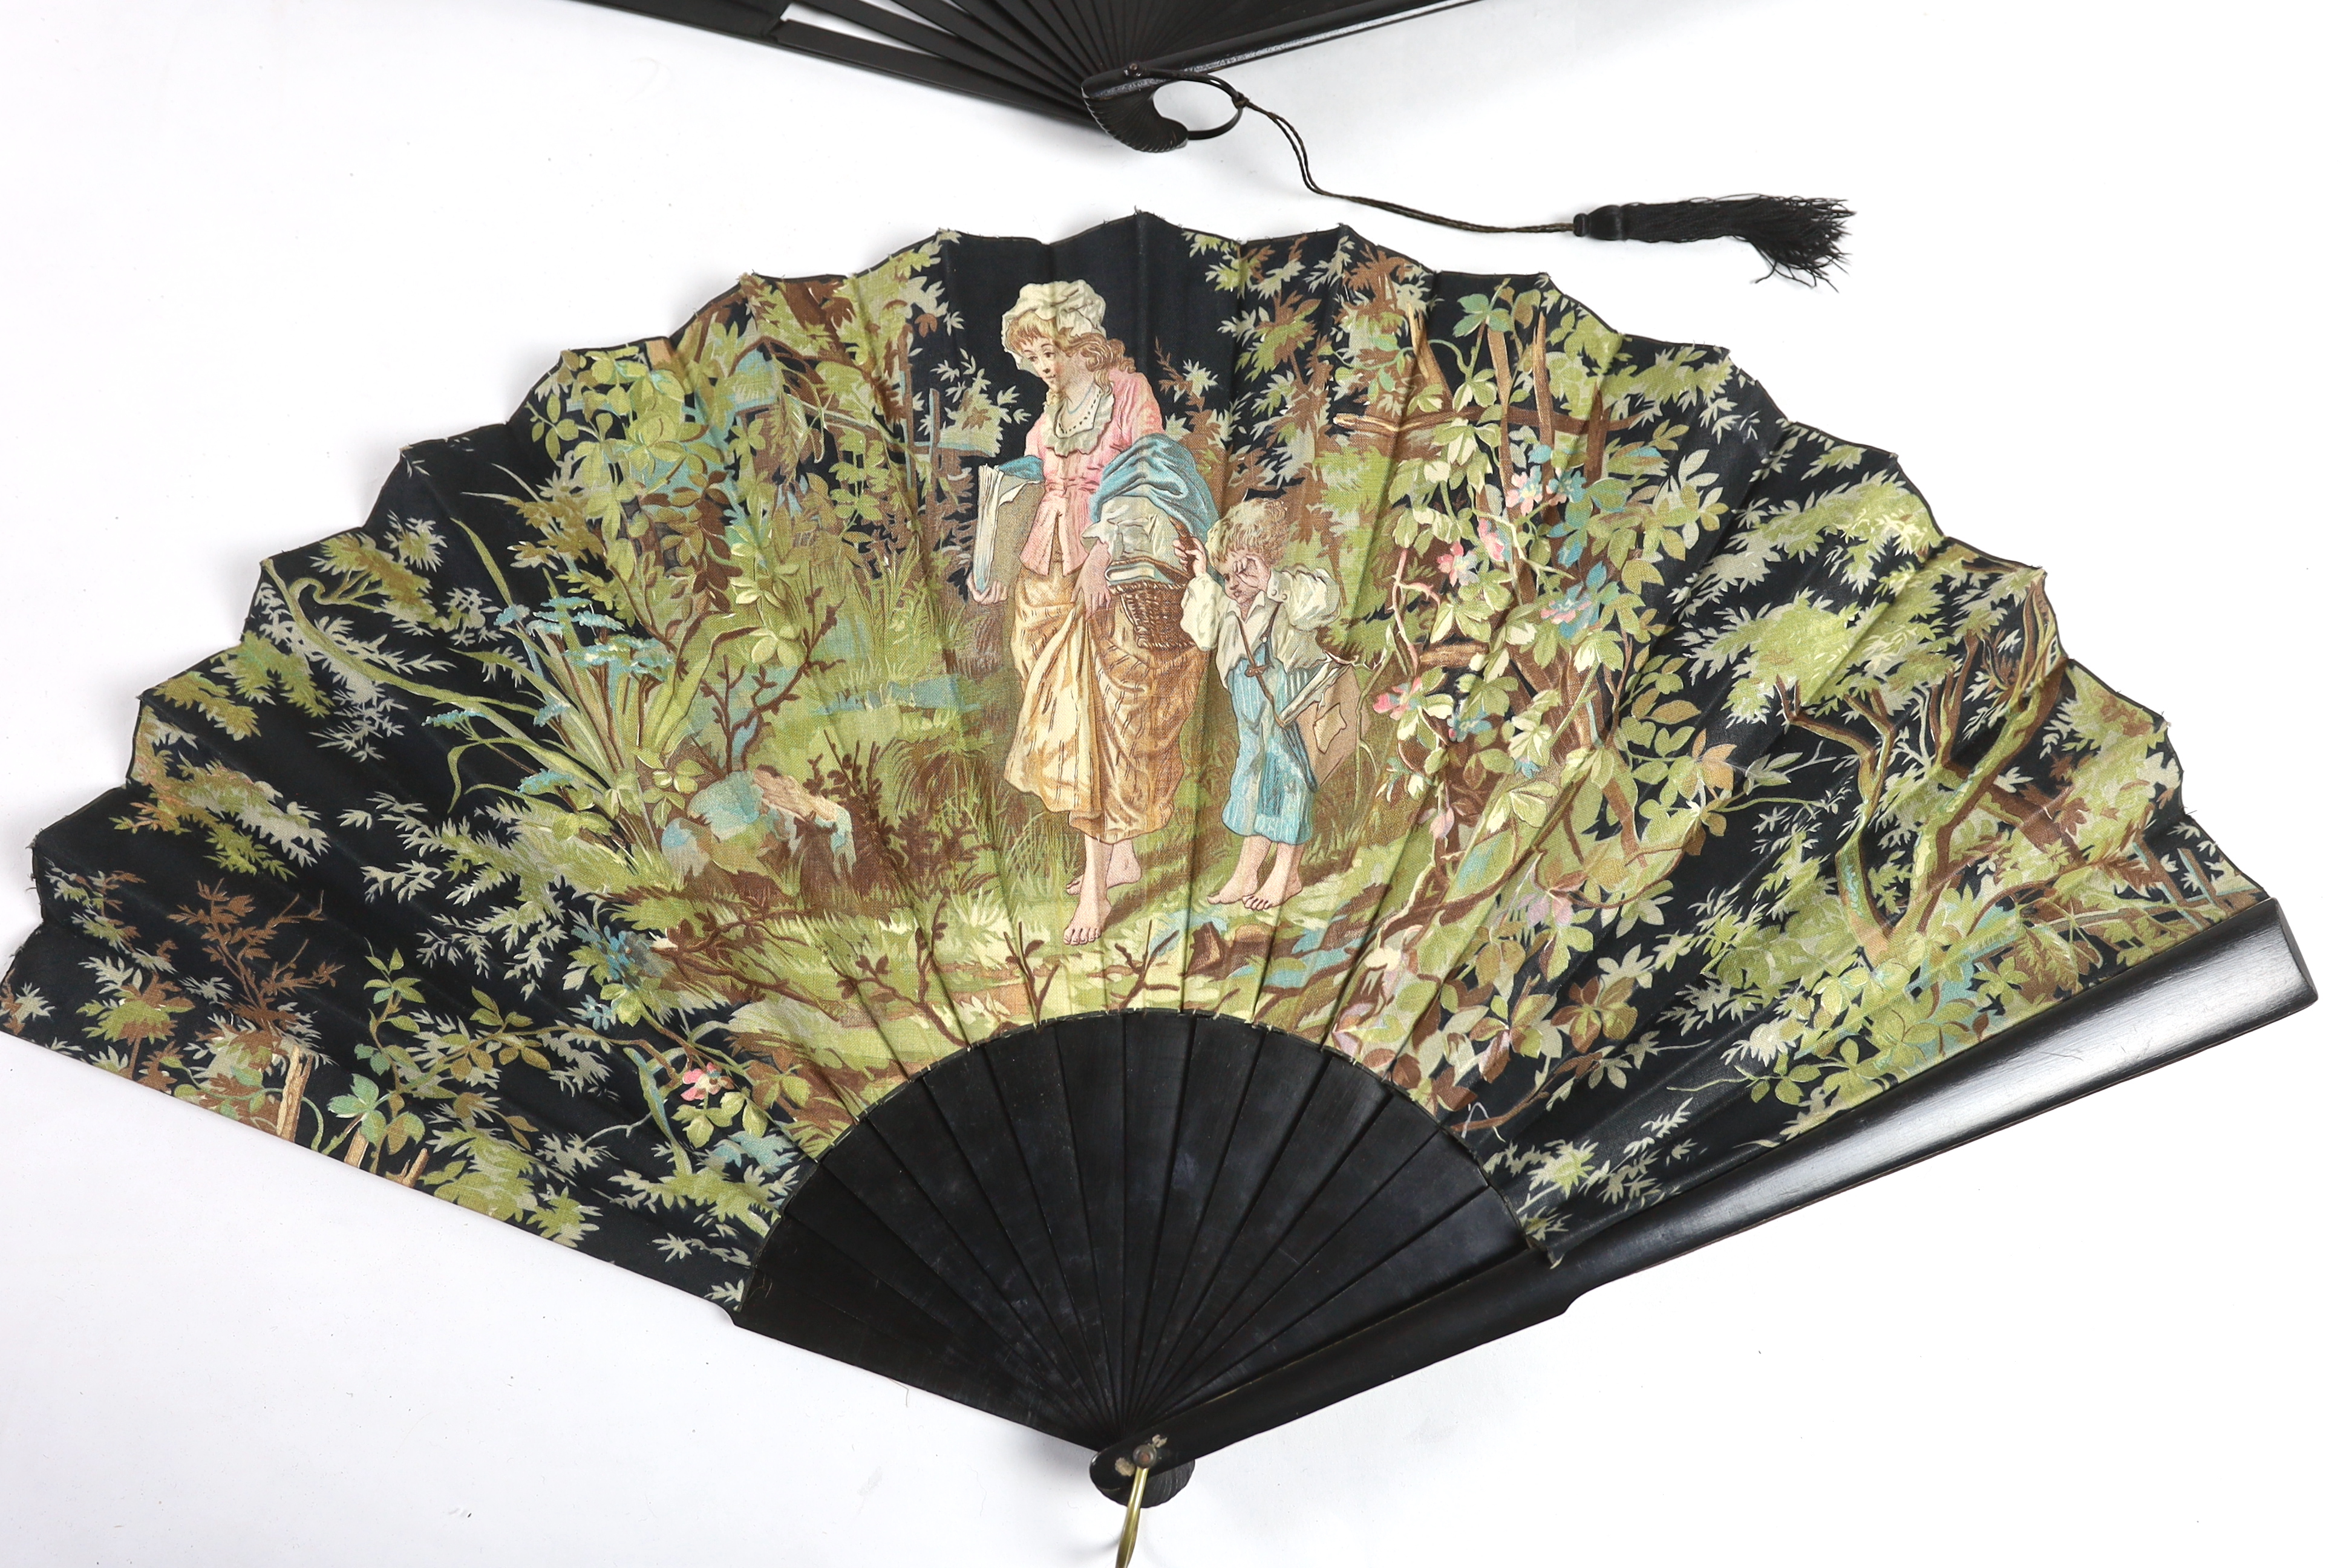 Two early 20th century ebony fans, one cotton leaf, the other hand painted pansies on a fine a silk leaf